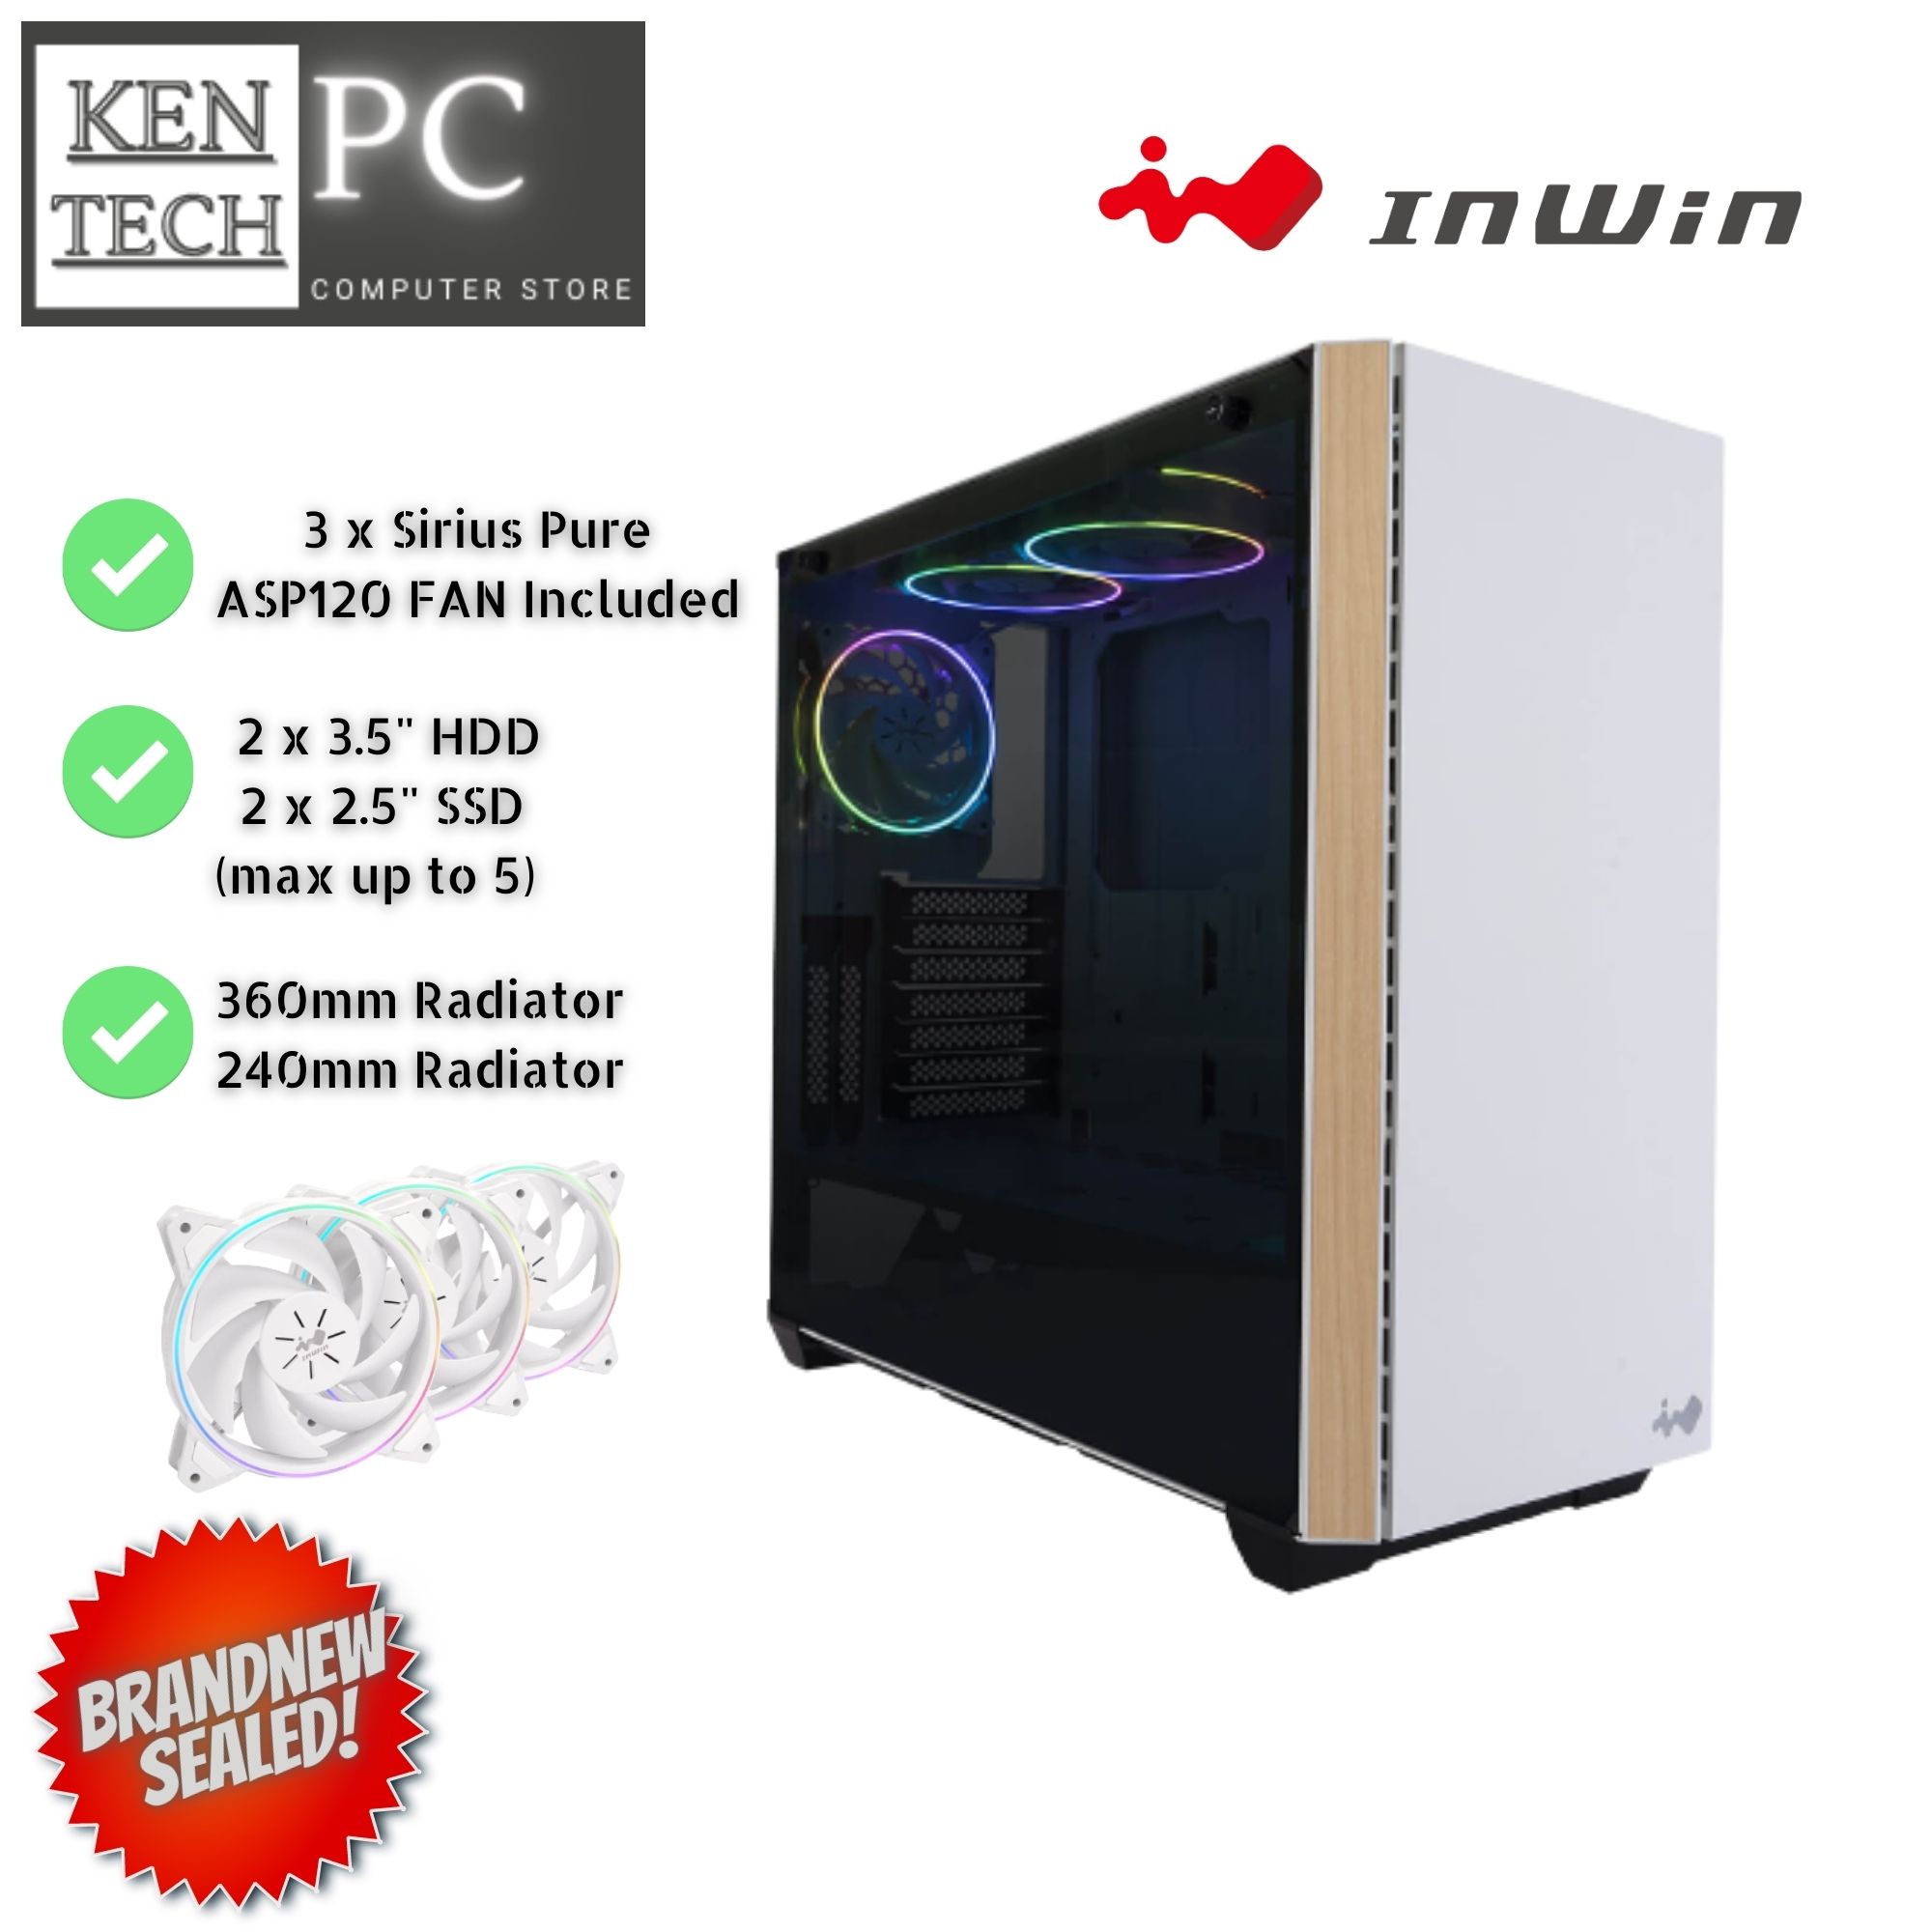 INWIN 216 White ATX Tempered Glass MID TOWER CASE W/ Sirius Pure ASP120 ...